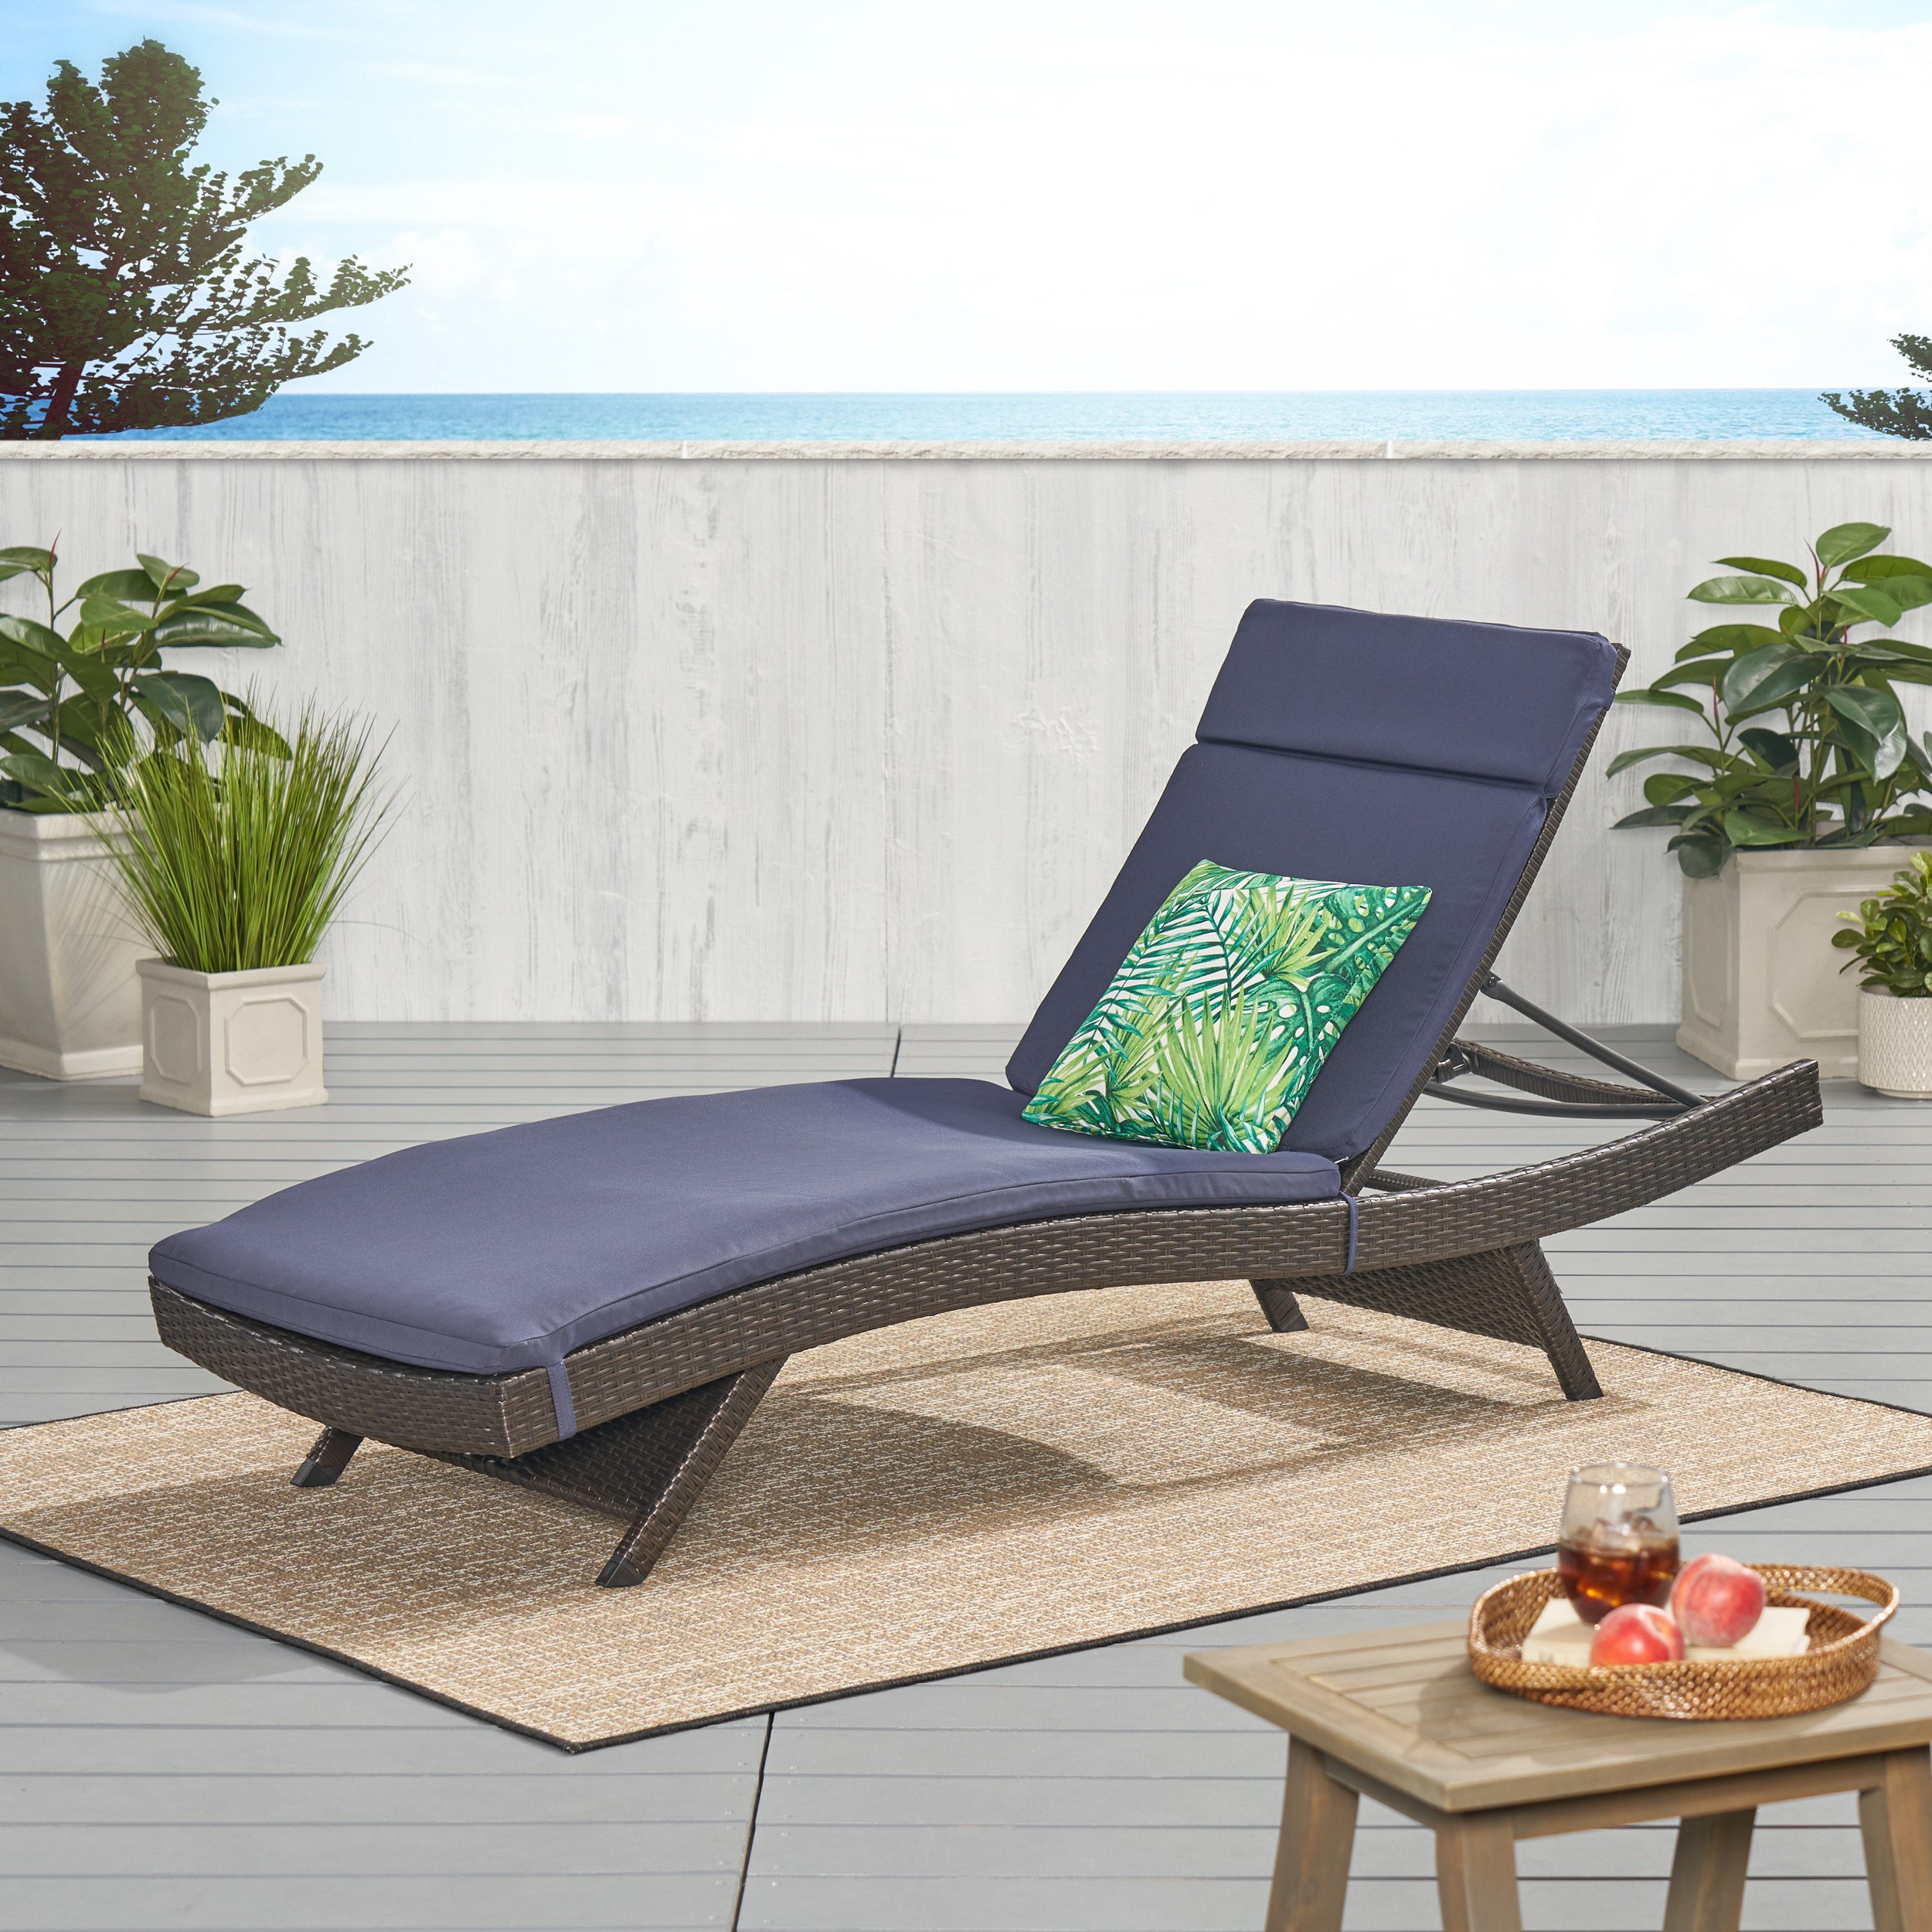 Lakeport Outdoor Adjustable Chaise Lounge Chair With Cushion - Charcoal Cushion